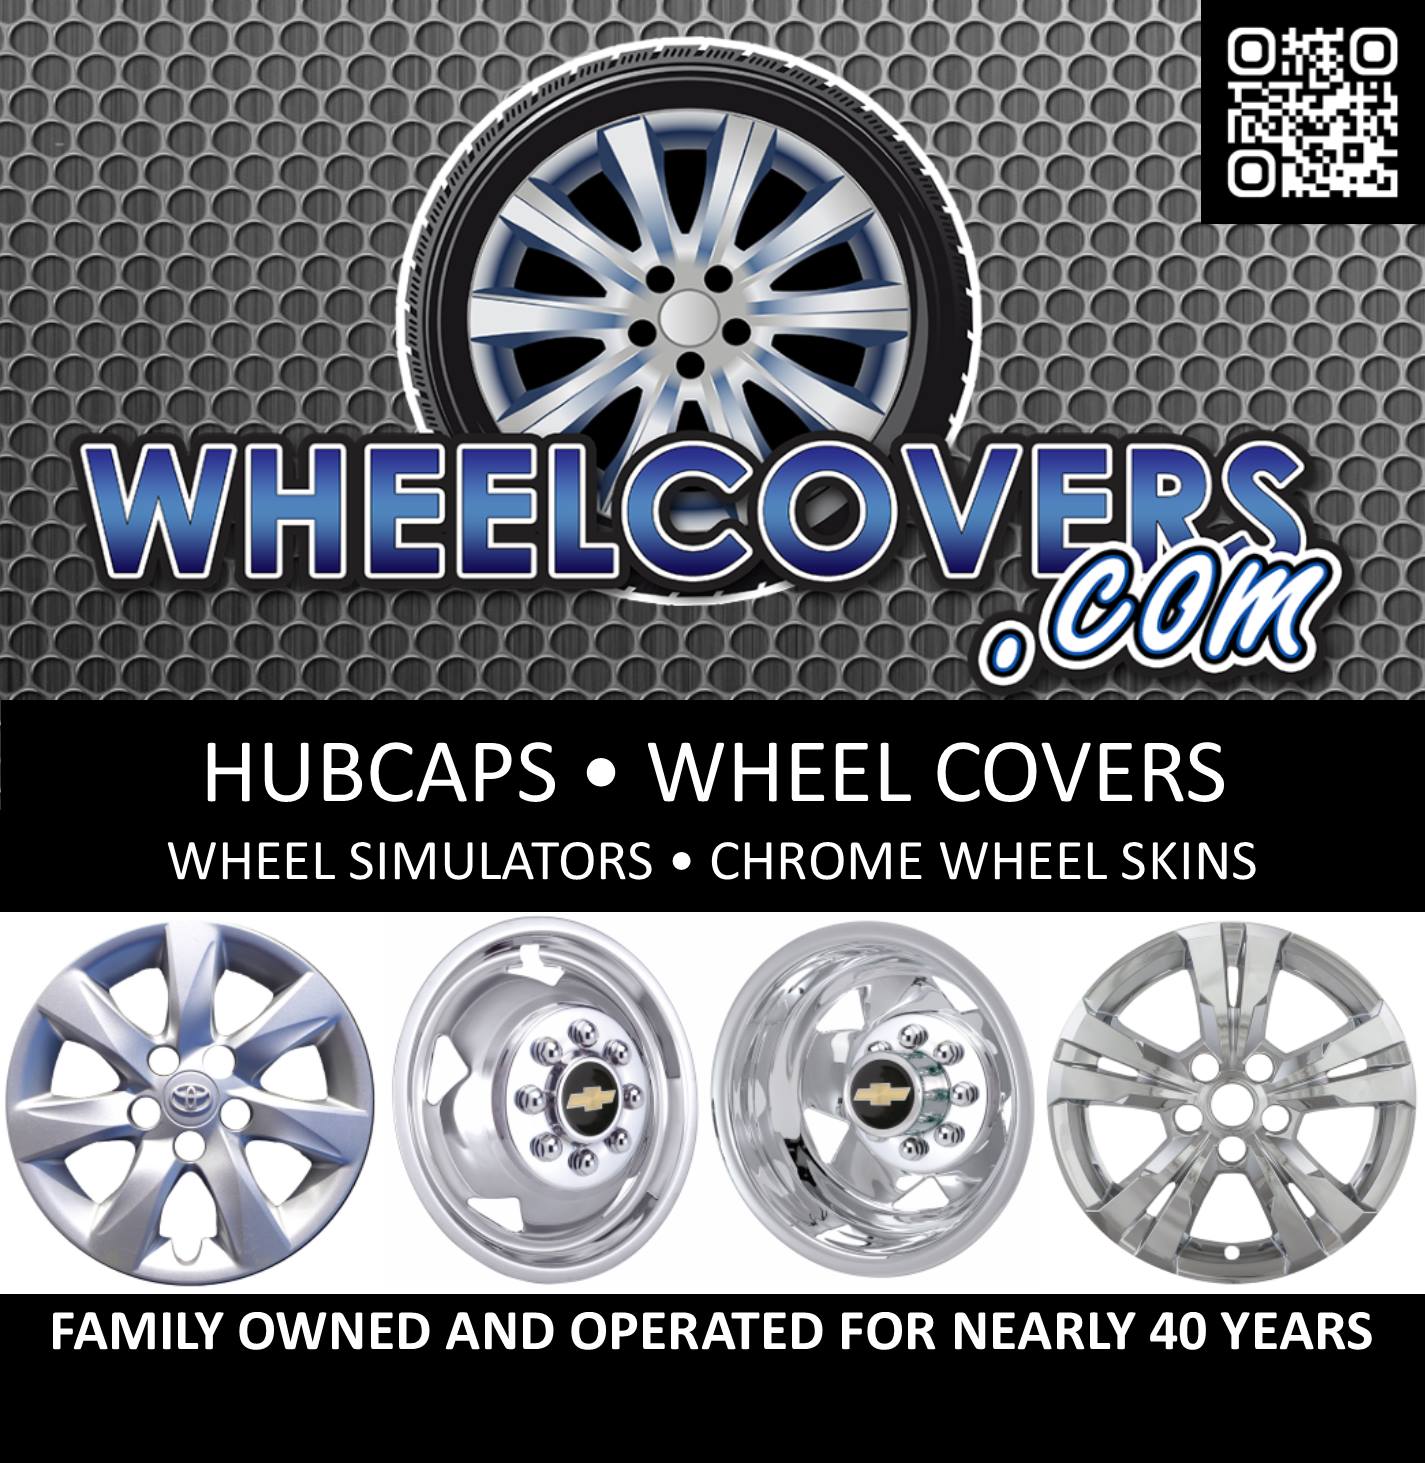 Hubcaps Wheel Covers and Wheel Skins at WheelCoversCom